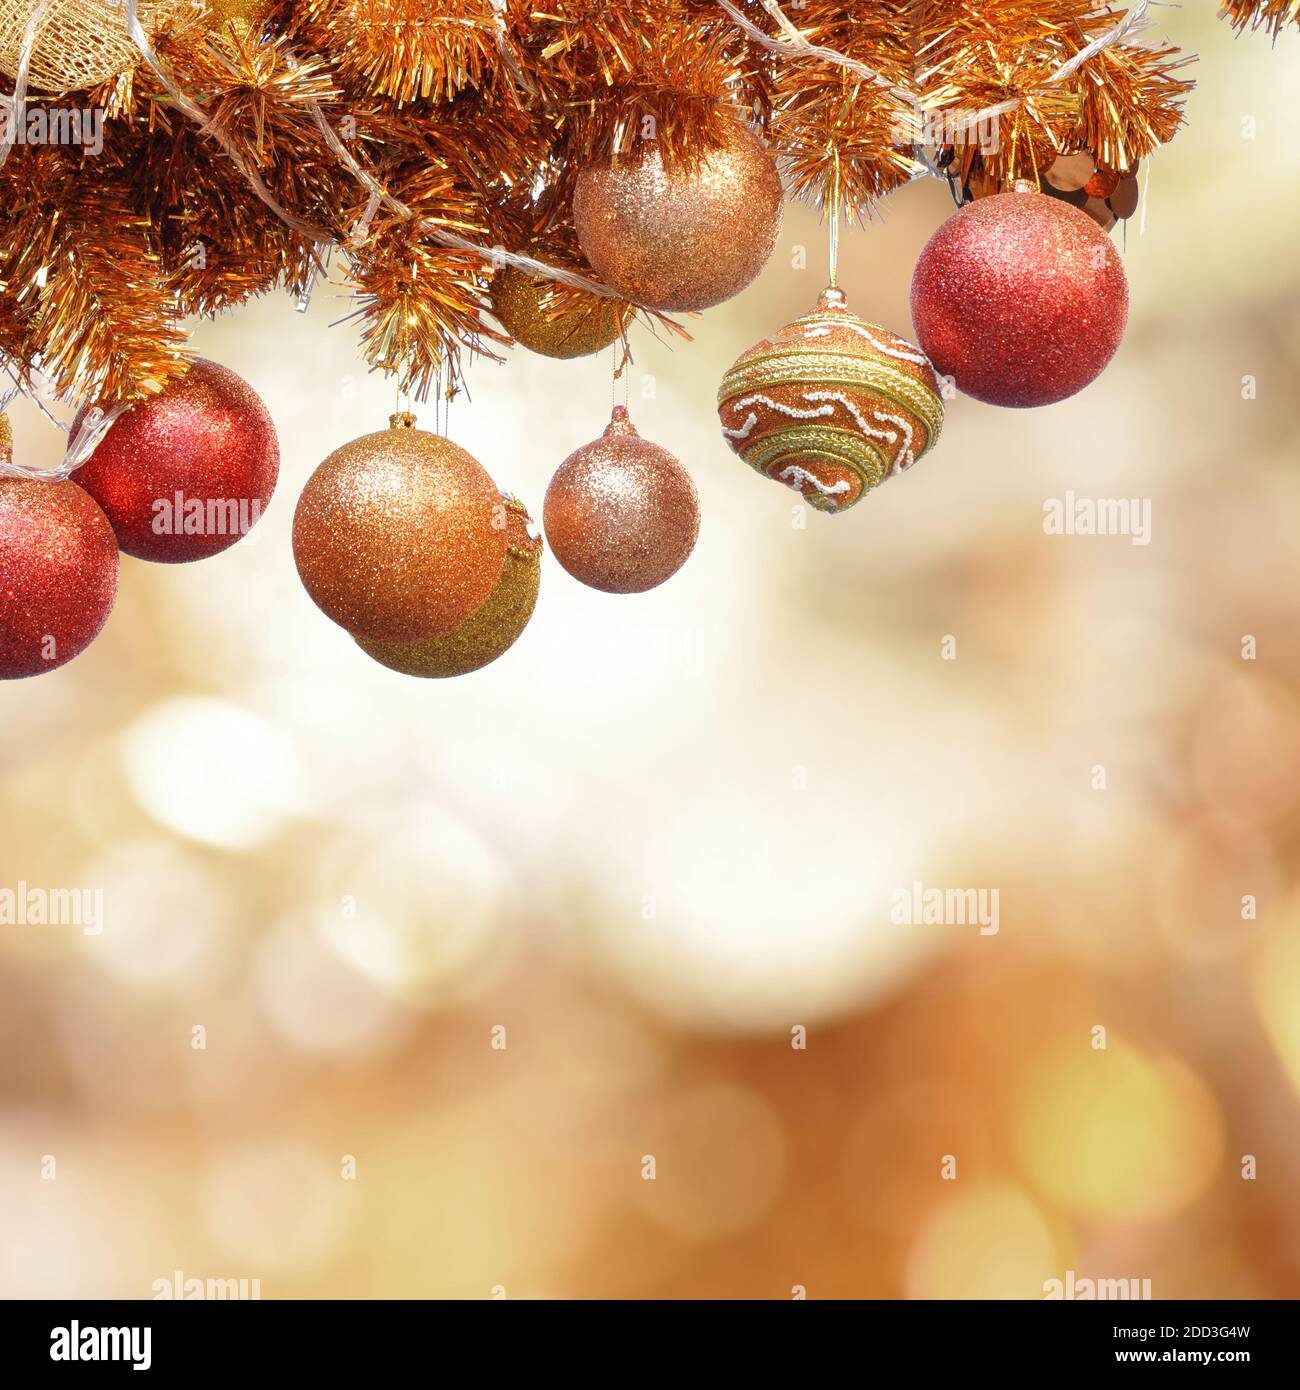 Christmas ornaments on lens flare background Stock Photo